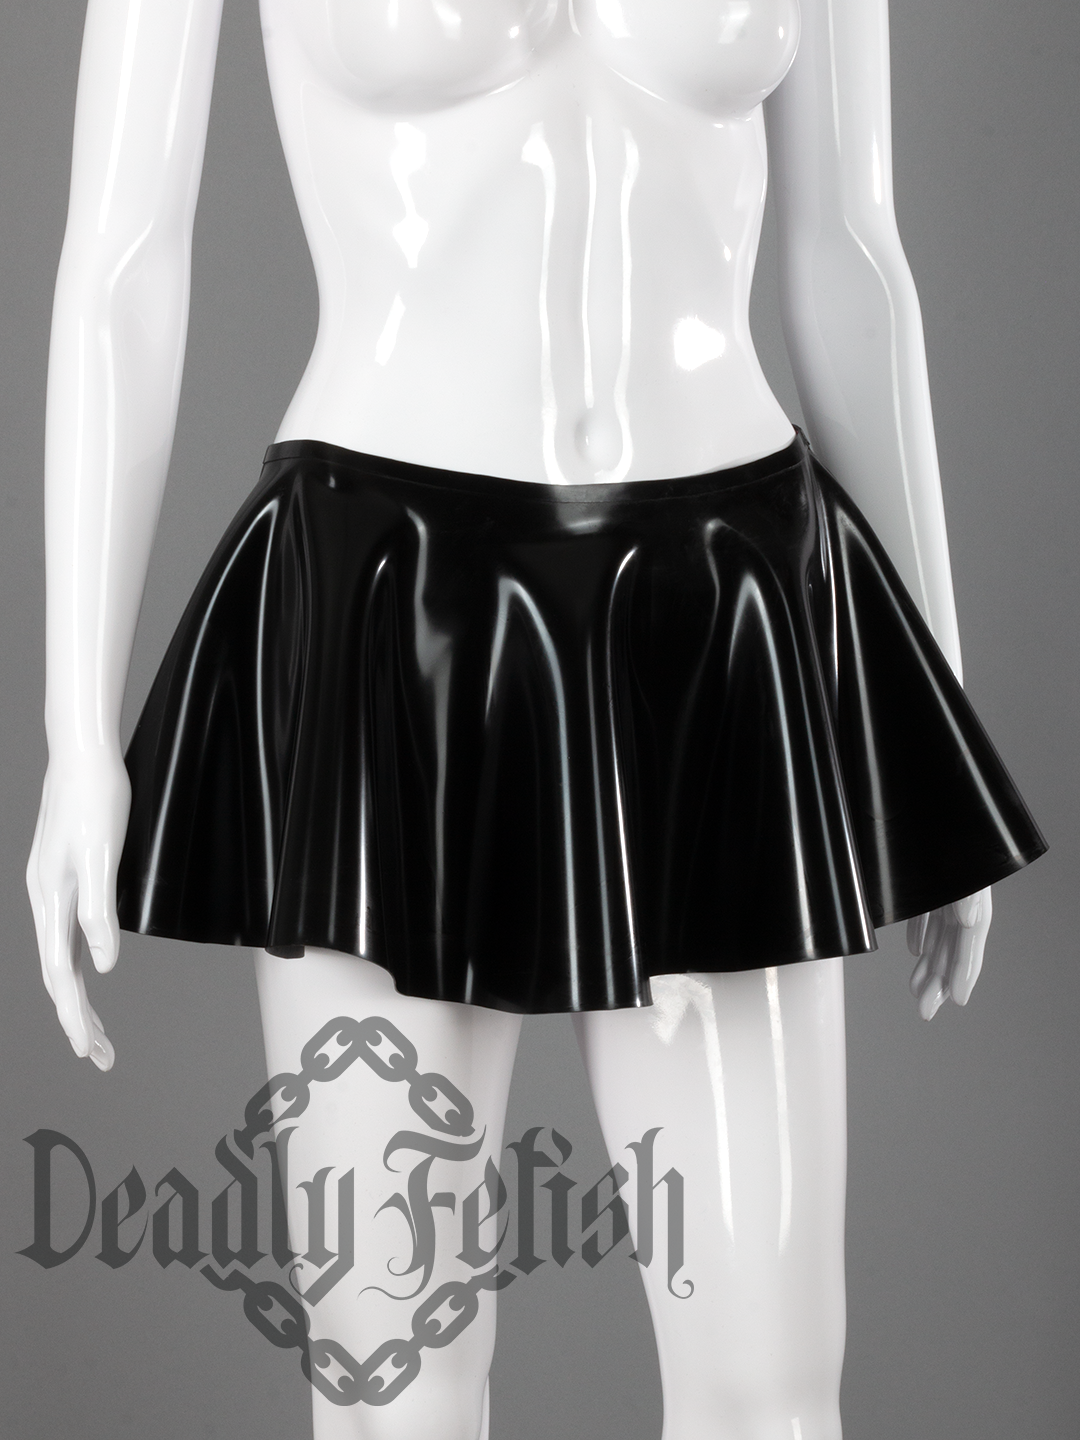 Deadly Fetish Made-To-Order Latex: Skirt #12